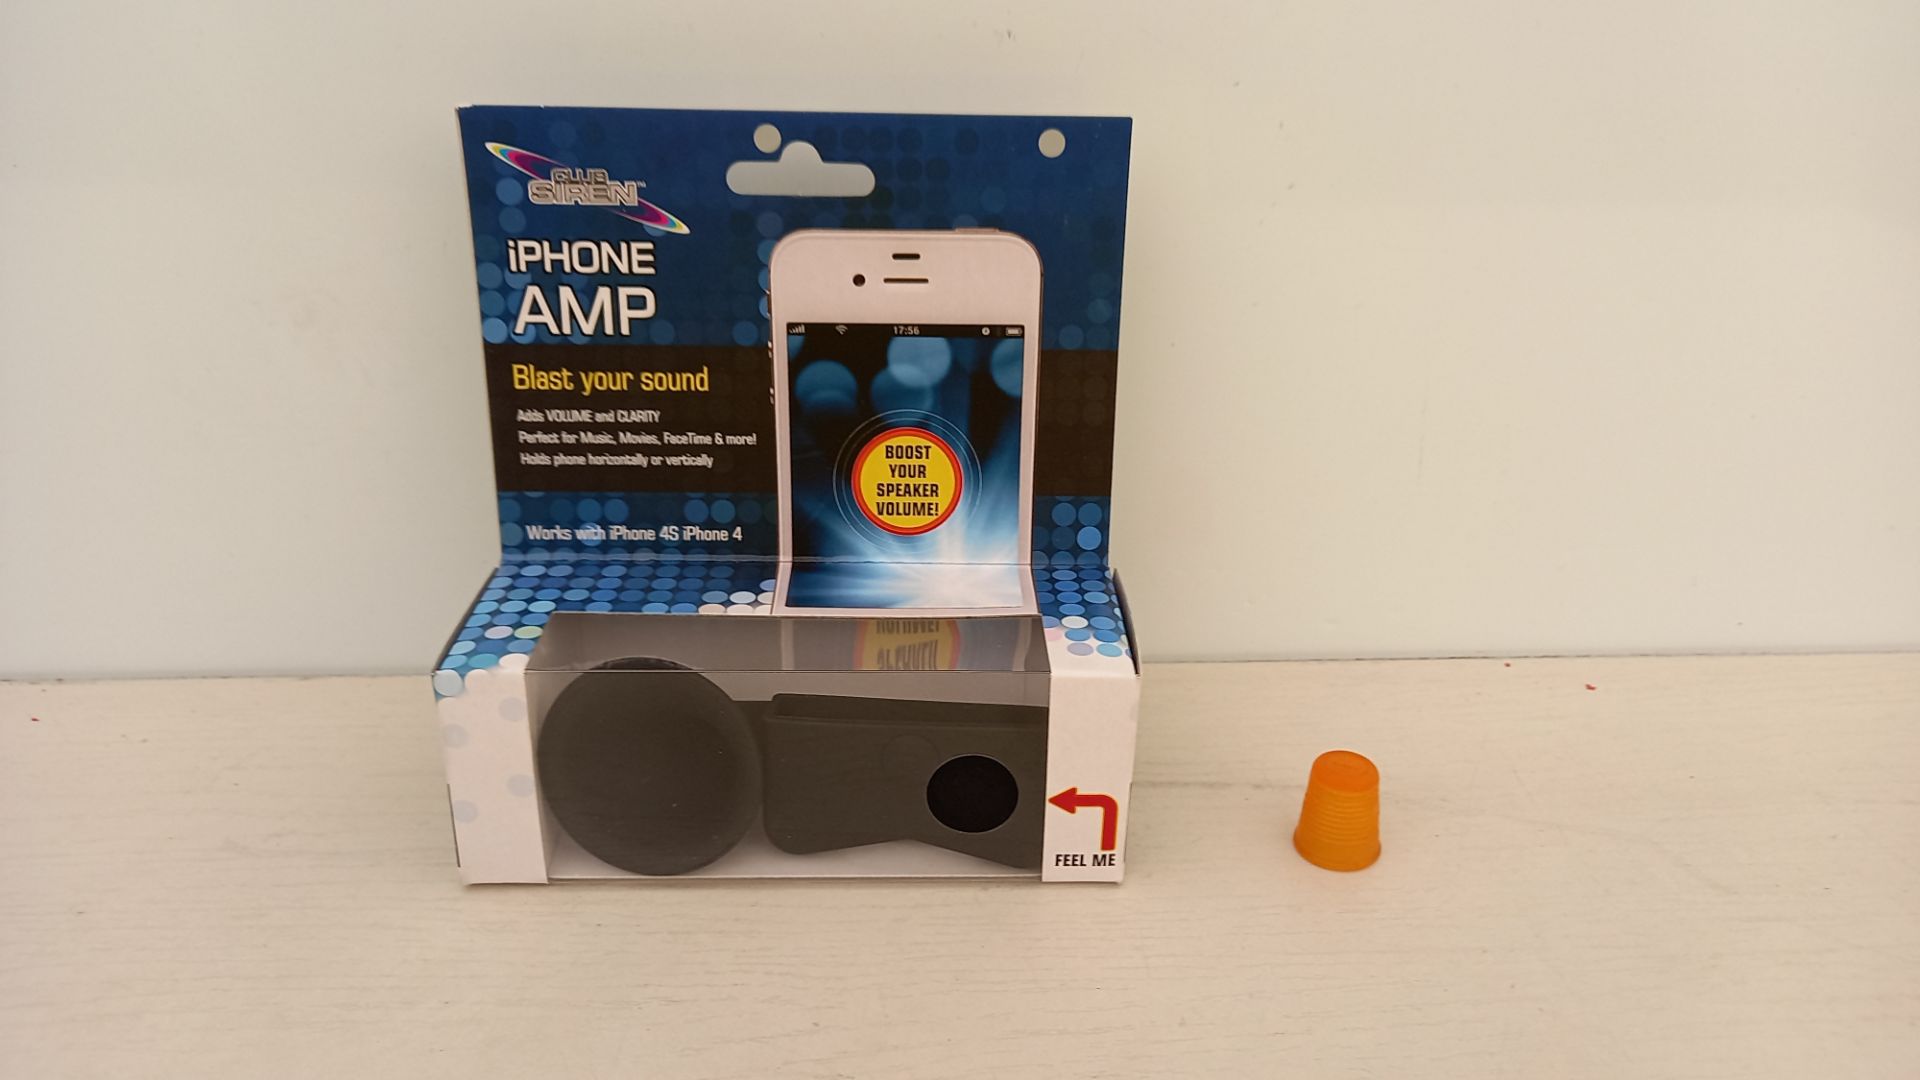 240 X BRAND NEW CLUB SIREN IPHONE AMP ( FLEXABLE WASHABLE SILICONE ) WORKS ON IPHONE 4S AND I